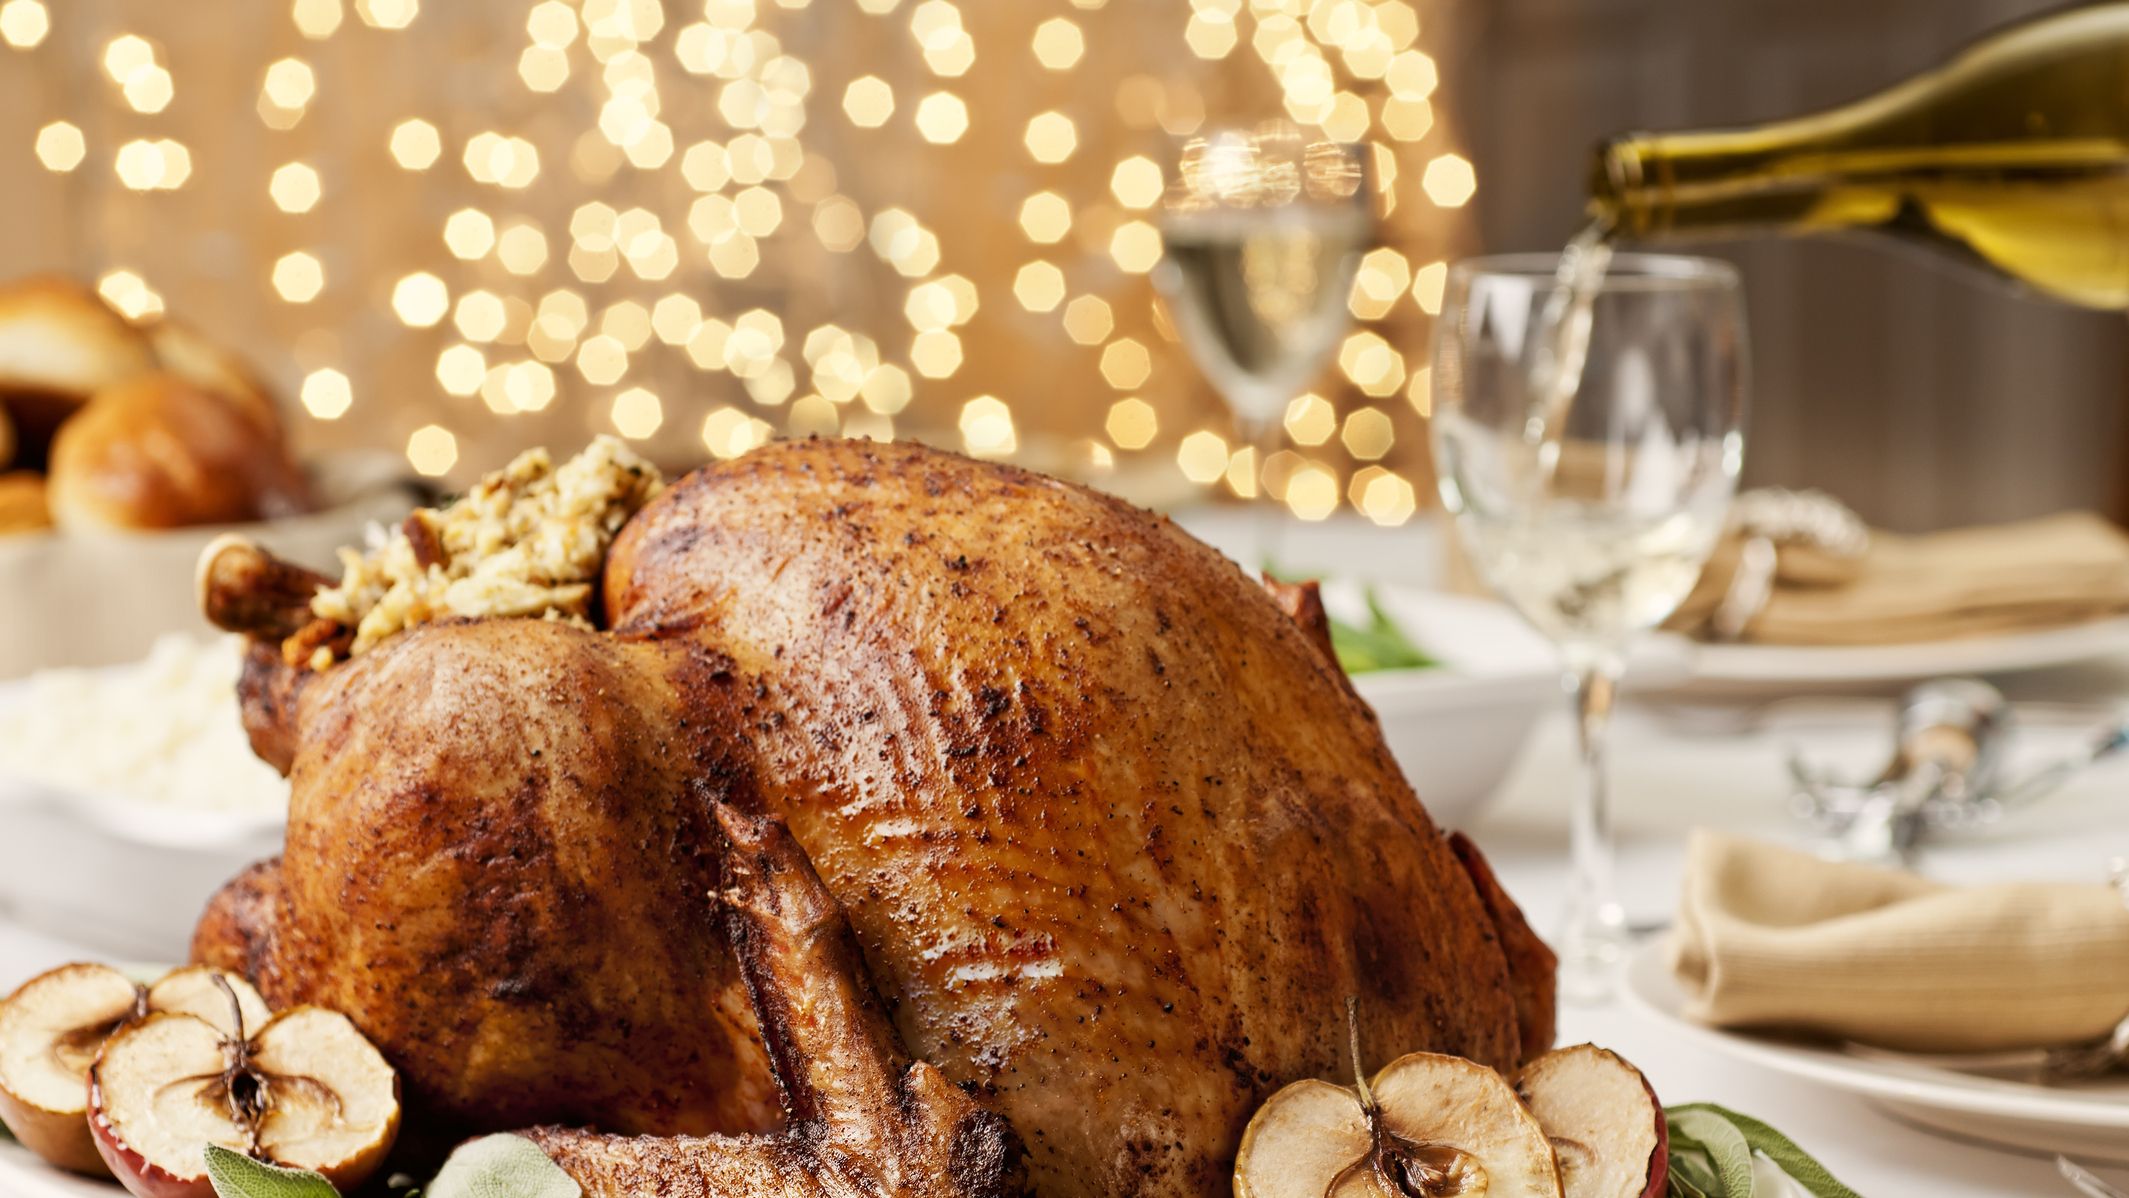 https://hips.hearstapps.com/hmg-prod/images/how-long-to-cook-a-turkey-1660664286.jpg?crop=1xw:0.8511460554371002xh;center,top